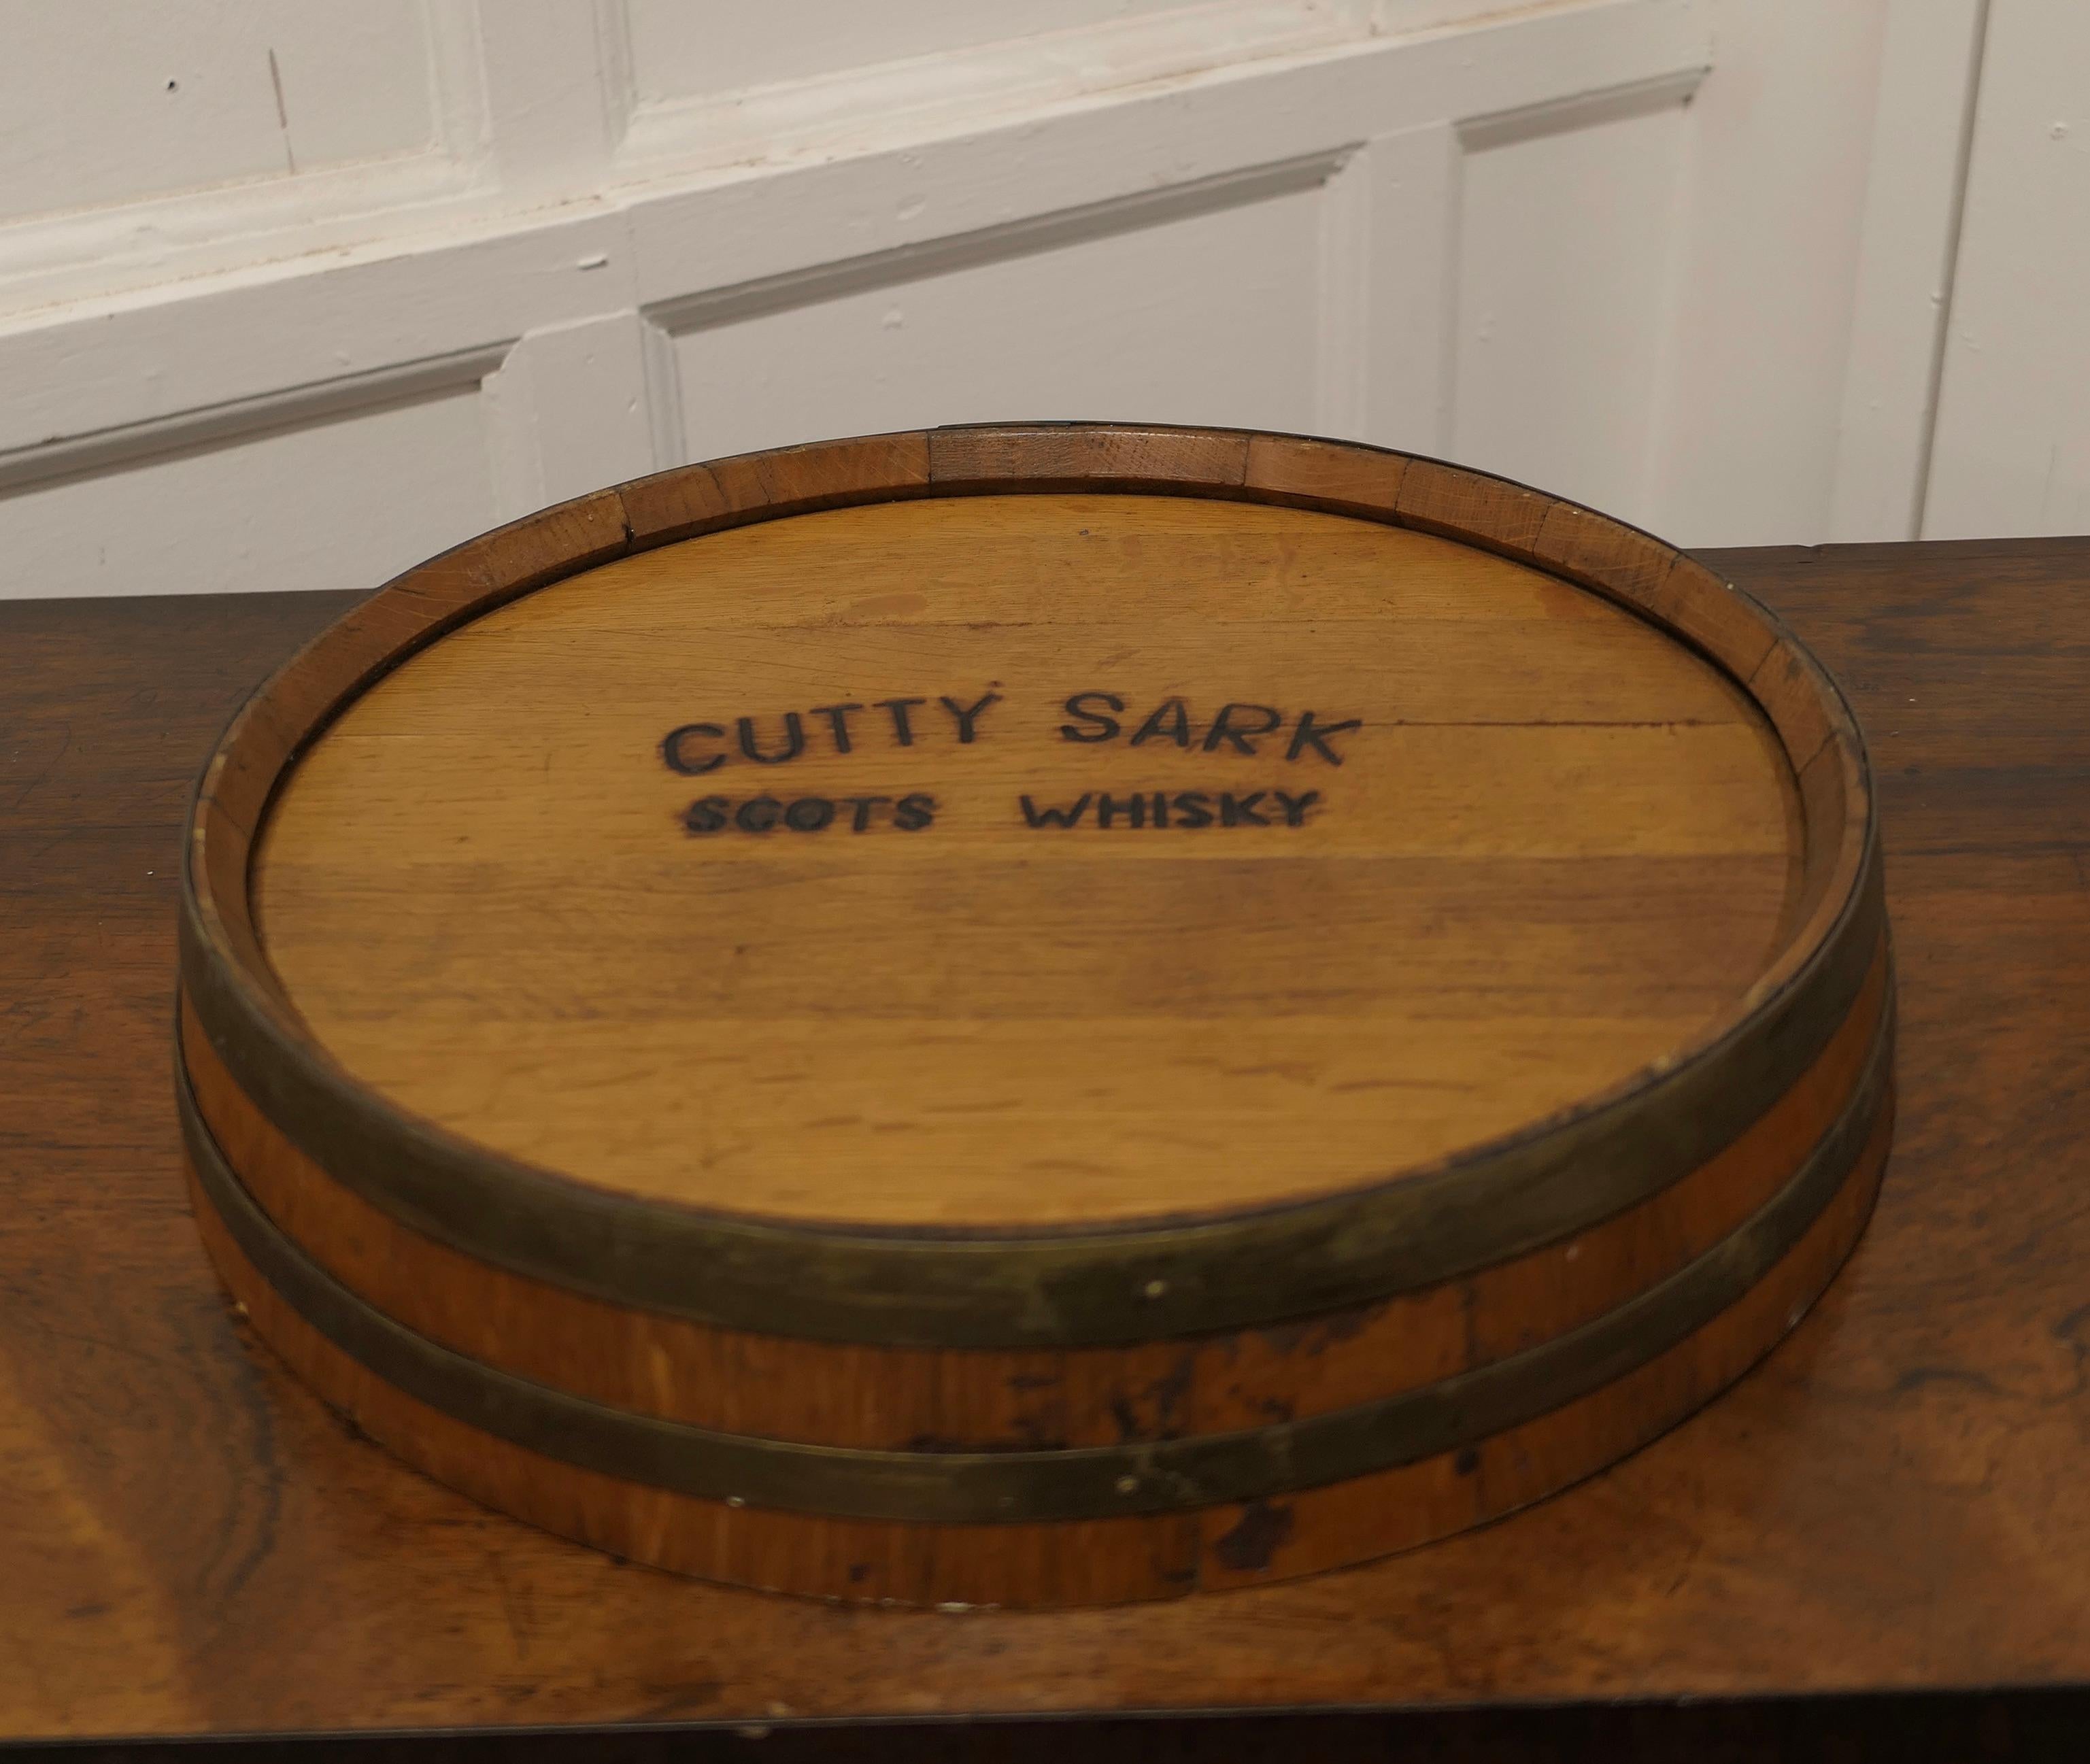 Cutty Cutty Sark Scots Whisky Barrel Top tray

A good looking piece, made in golden oak and brass bound, this barrel top tray would have had pride of place on the bar to serve a Dram or 2 
The tray has hand holds and is a great looking piece
The